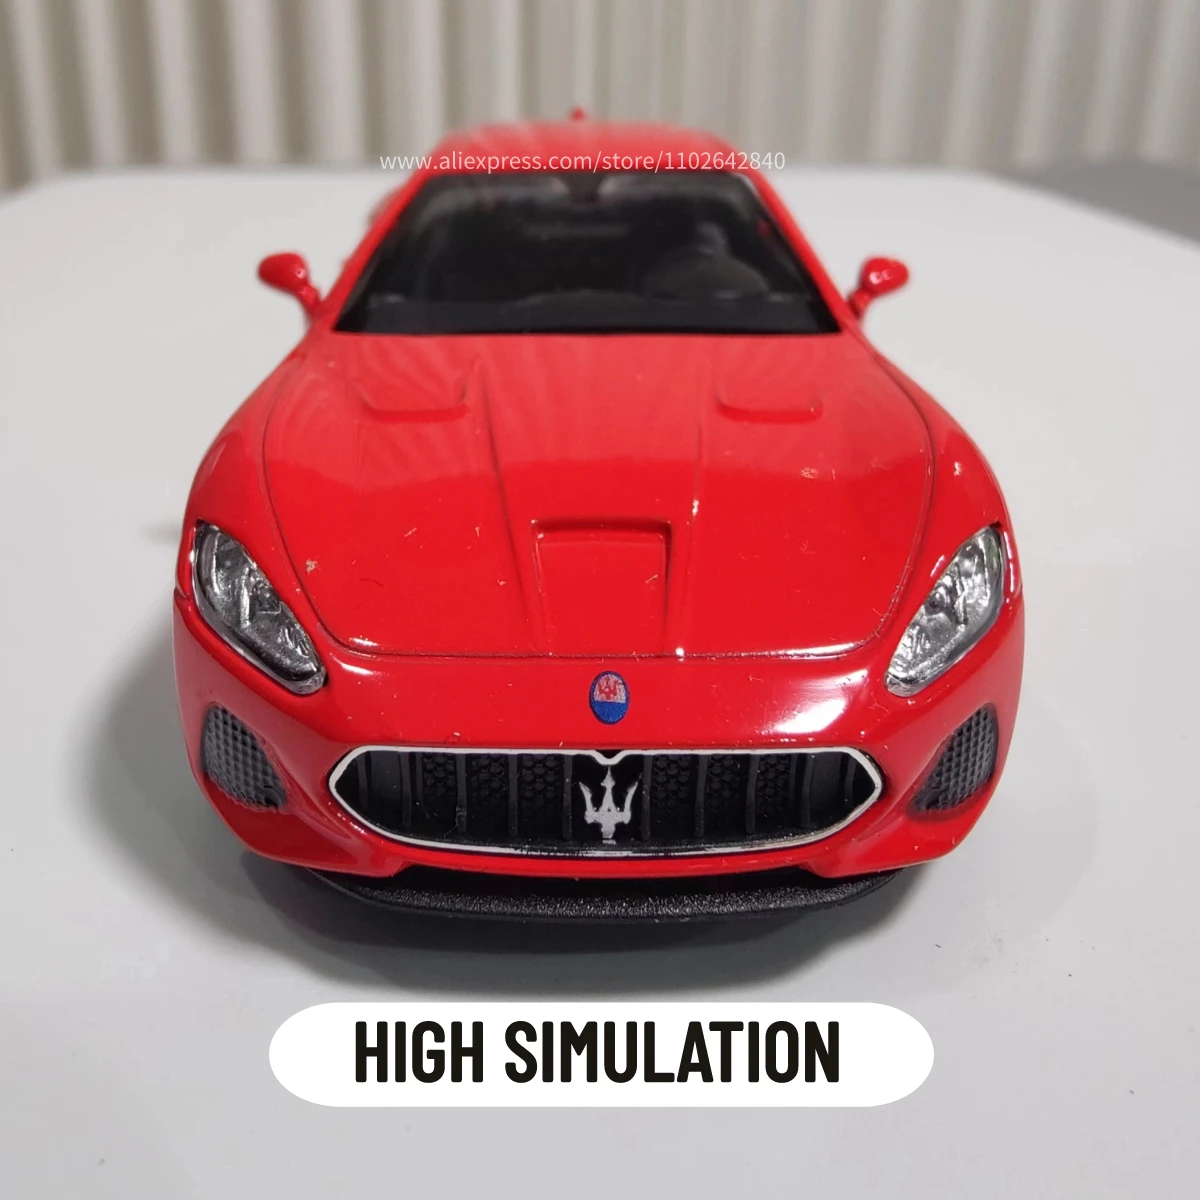 1:36 Metal Diecast Car Model Repilca Maserati Gran Turismo MC Scale  Miniature Collection Vehicle Hobby Kid Toy for Boy Xmas Gift